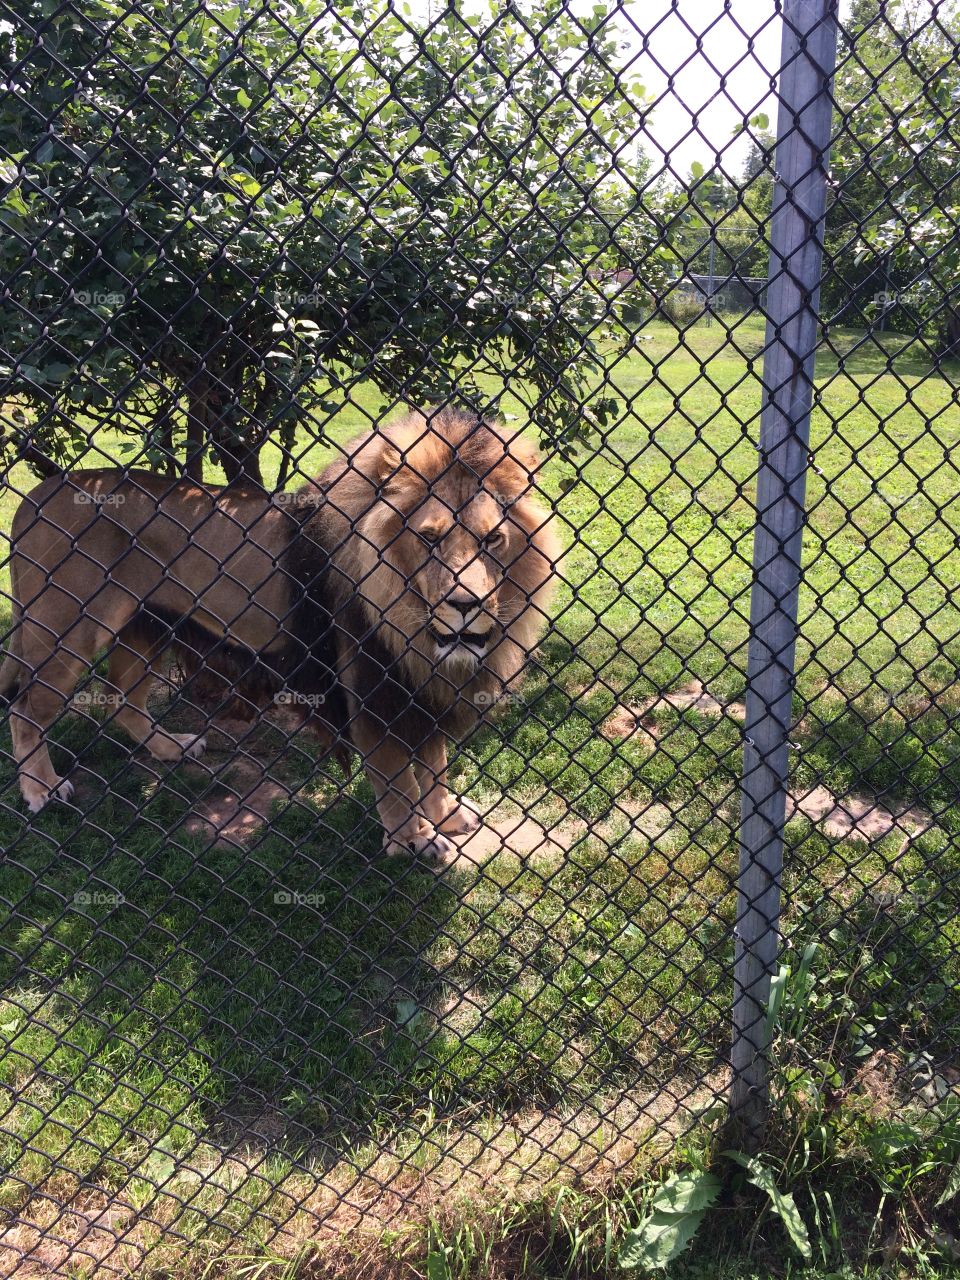 “Like a caged lion”. Nobody can fully understand that expression until they’ve faced this guy and had him roar right in front of them!